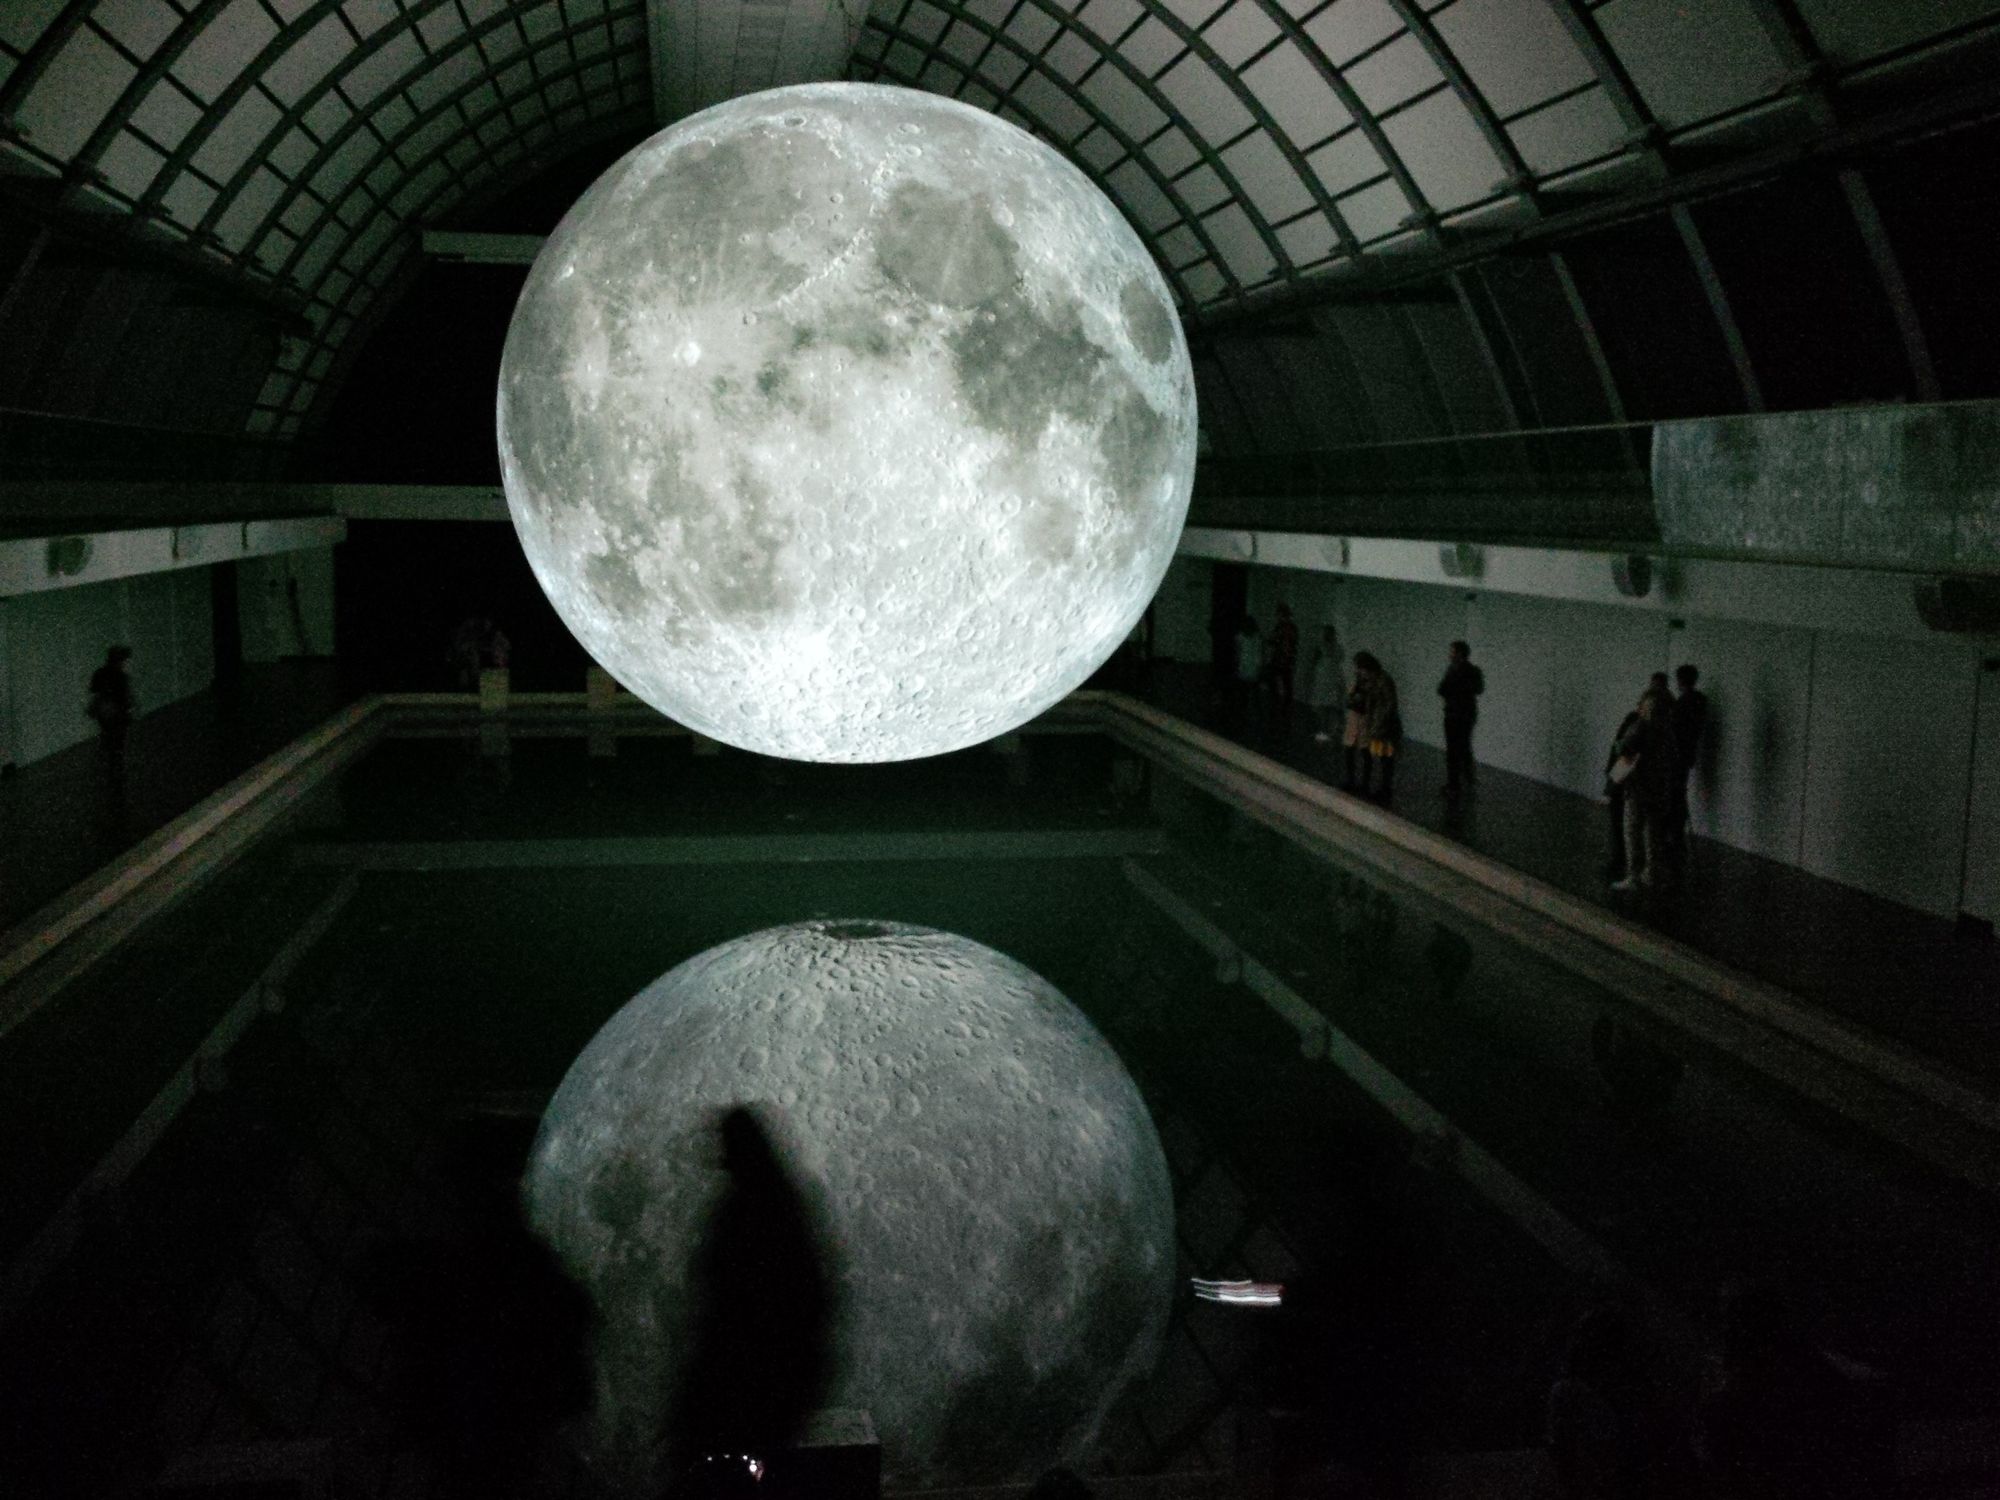 Full moon floating over a pool with reflection